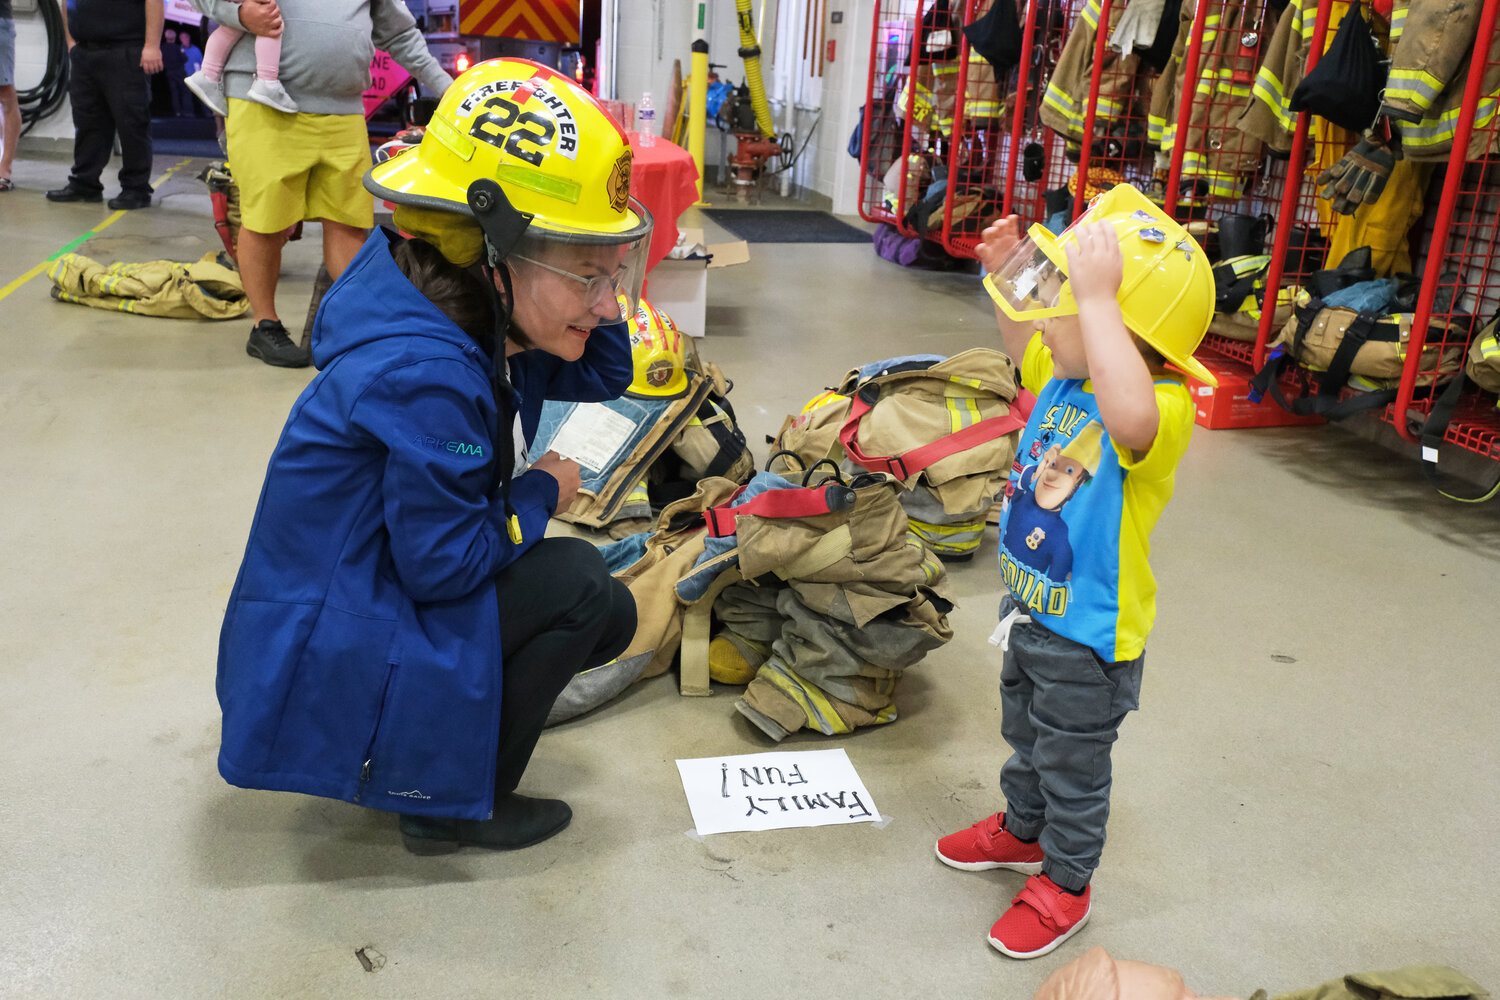 Jessica DeMott and Cameron MacInnis, 3, of Middletown, try on the equipment.